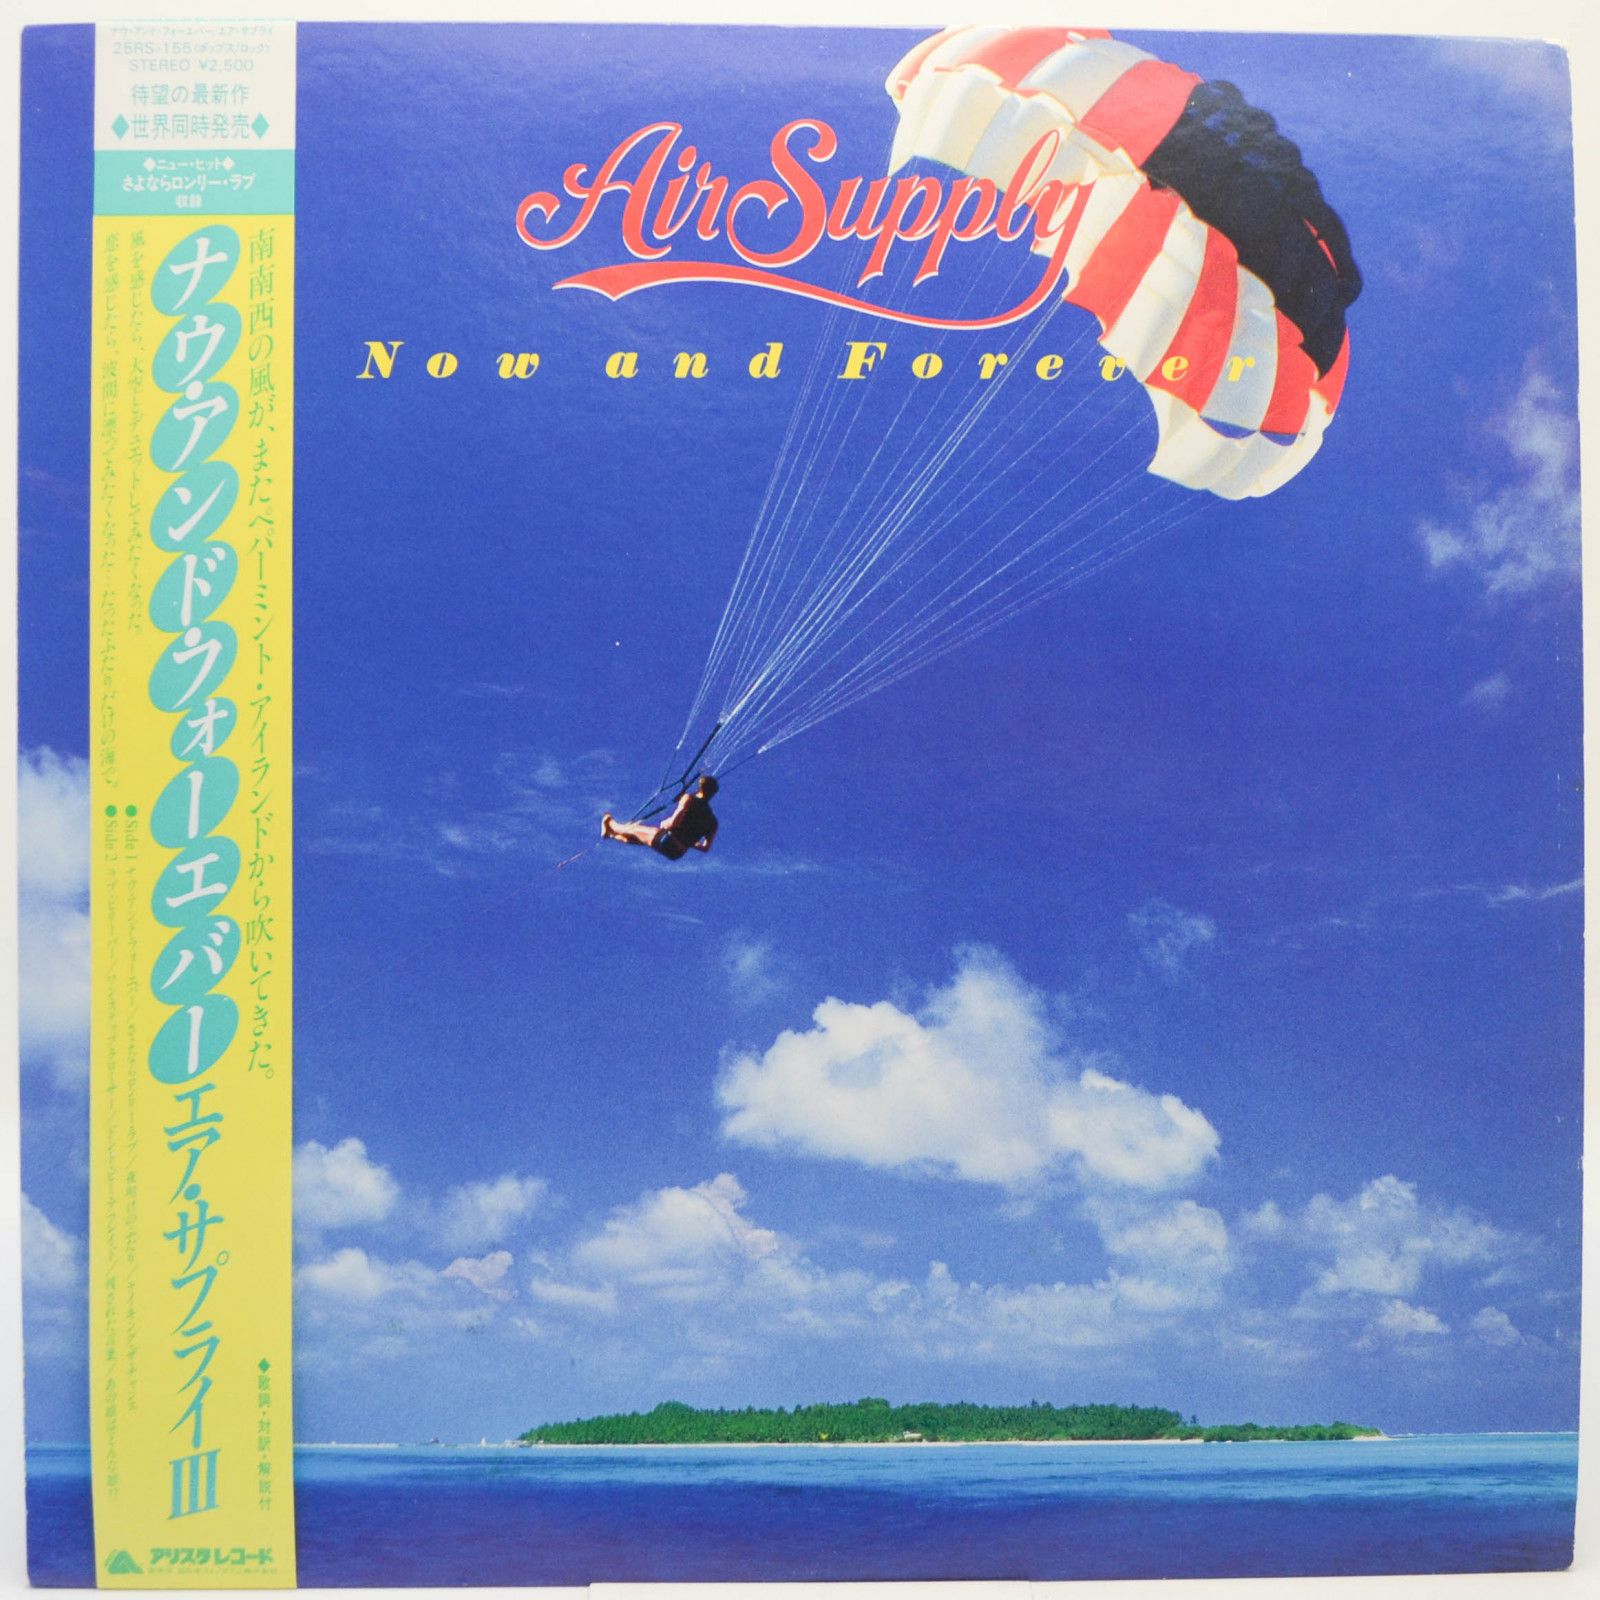 Air Supply — Now And Forever, 1982